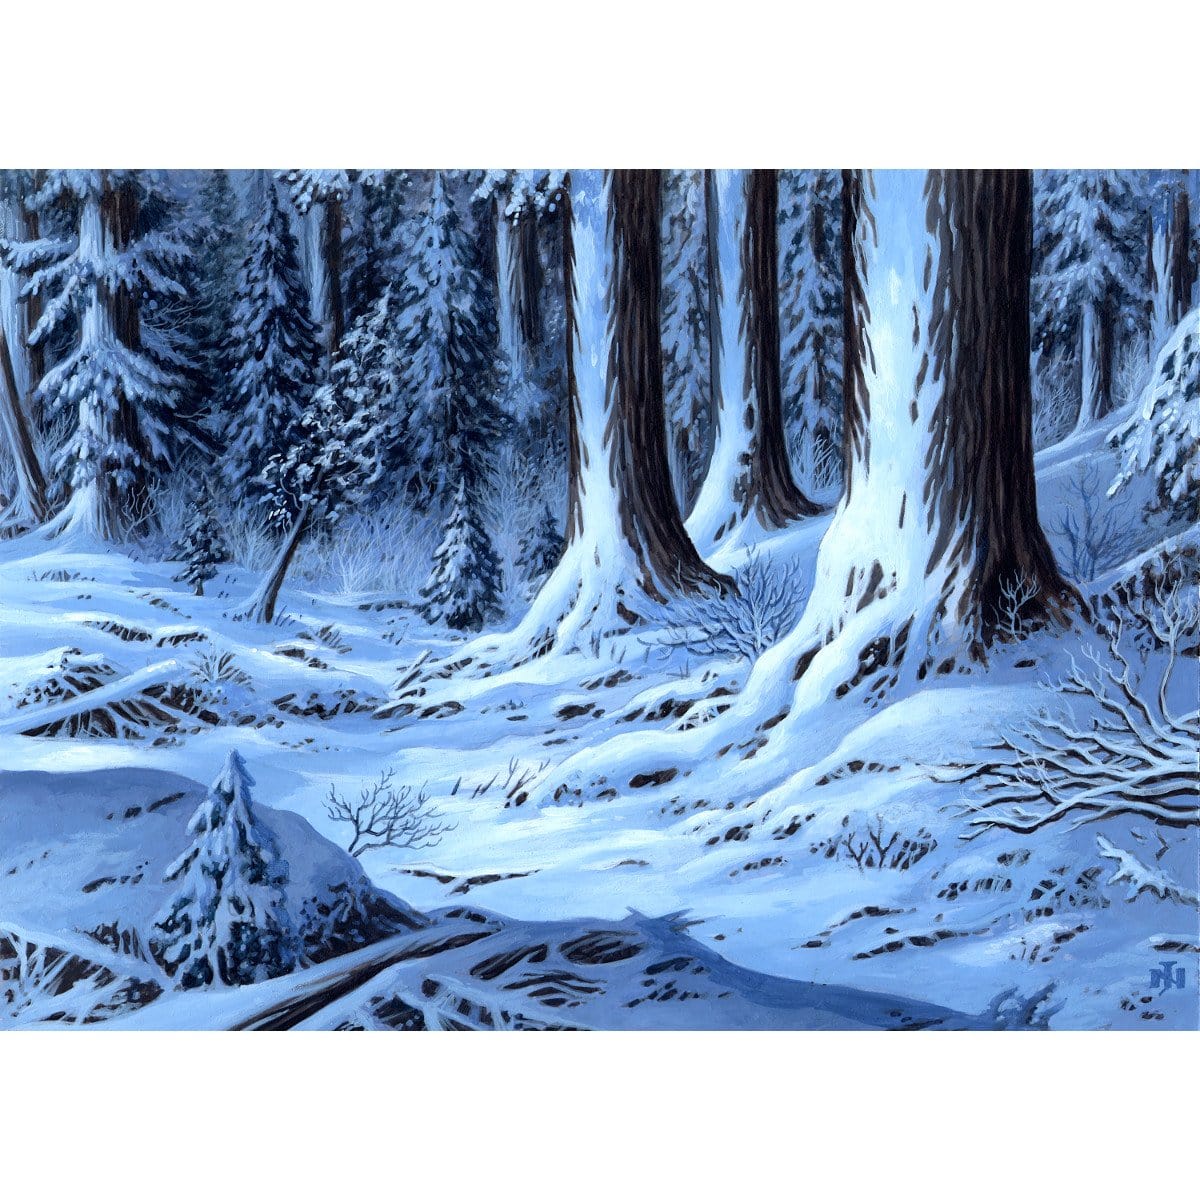 Snow-Covered Forest Print - Print - Original Magic Art - Accessories for Magic the Gathering and other card games